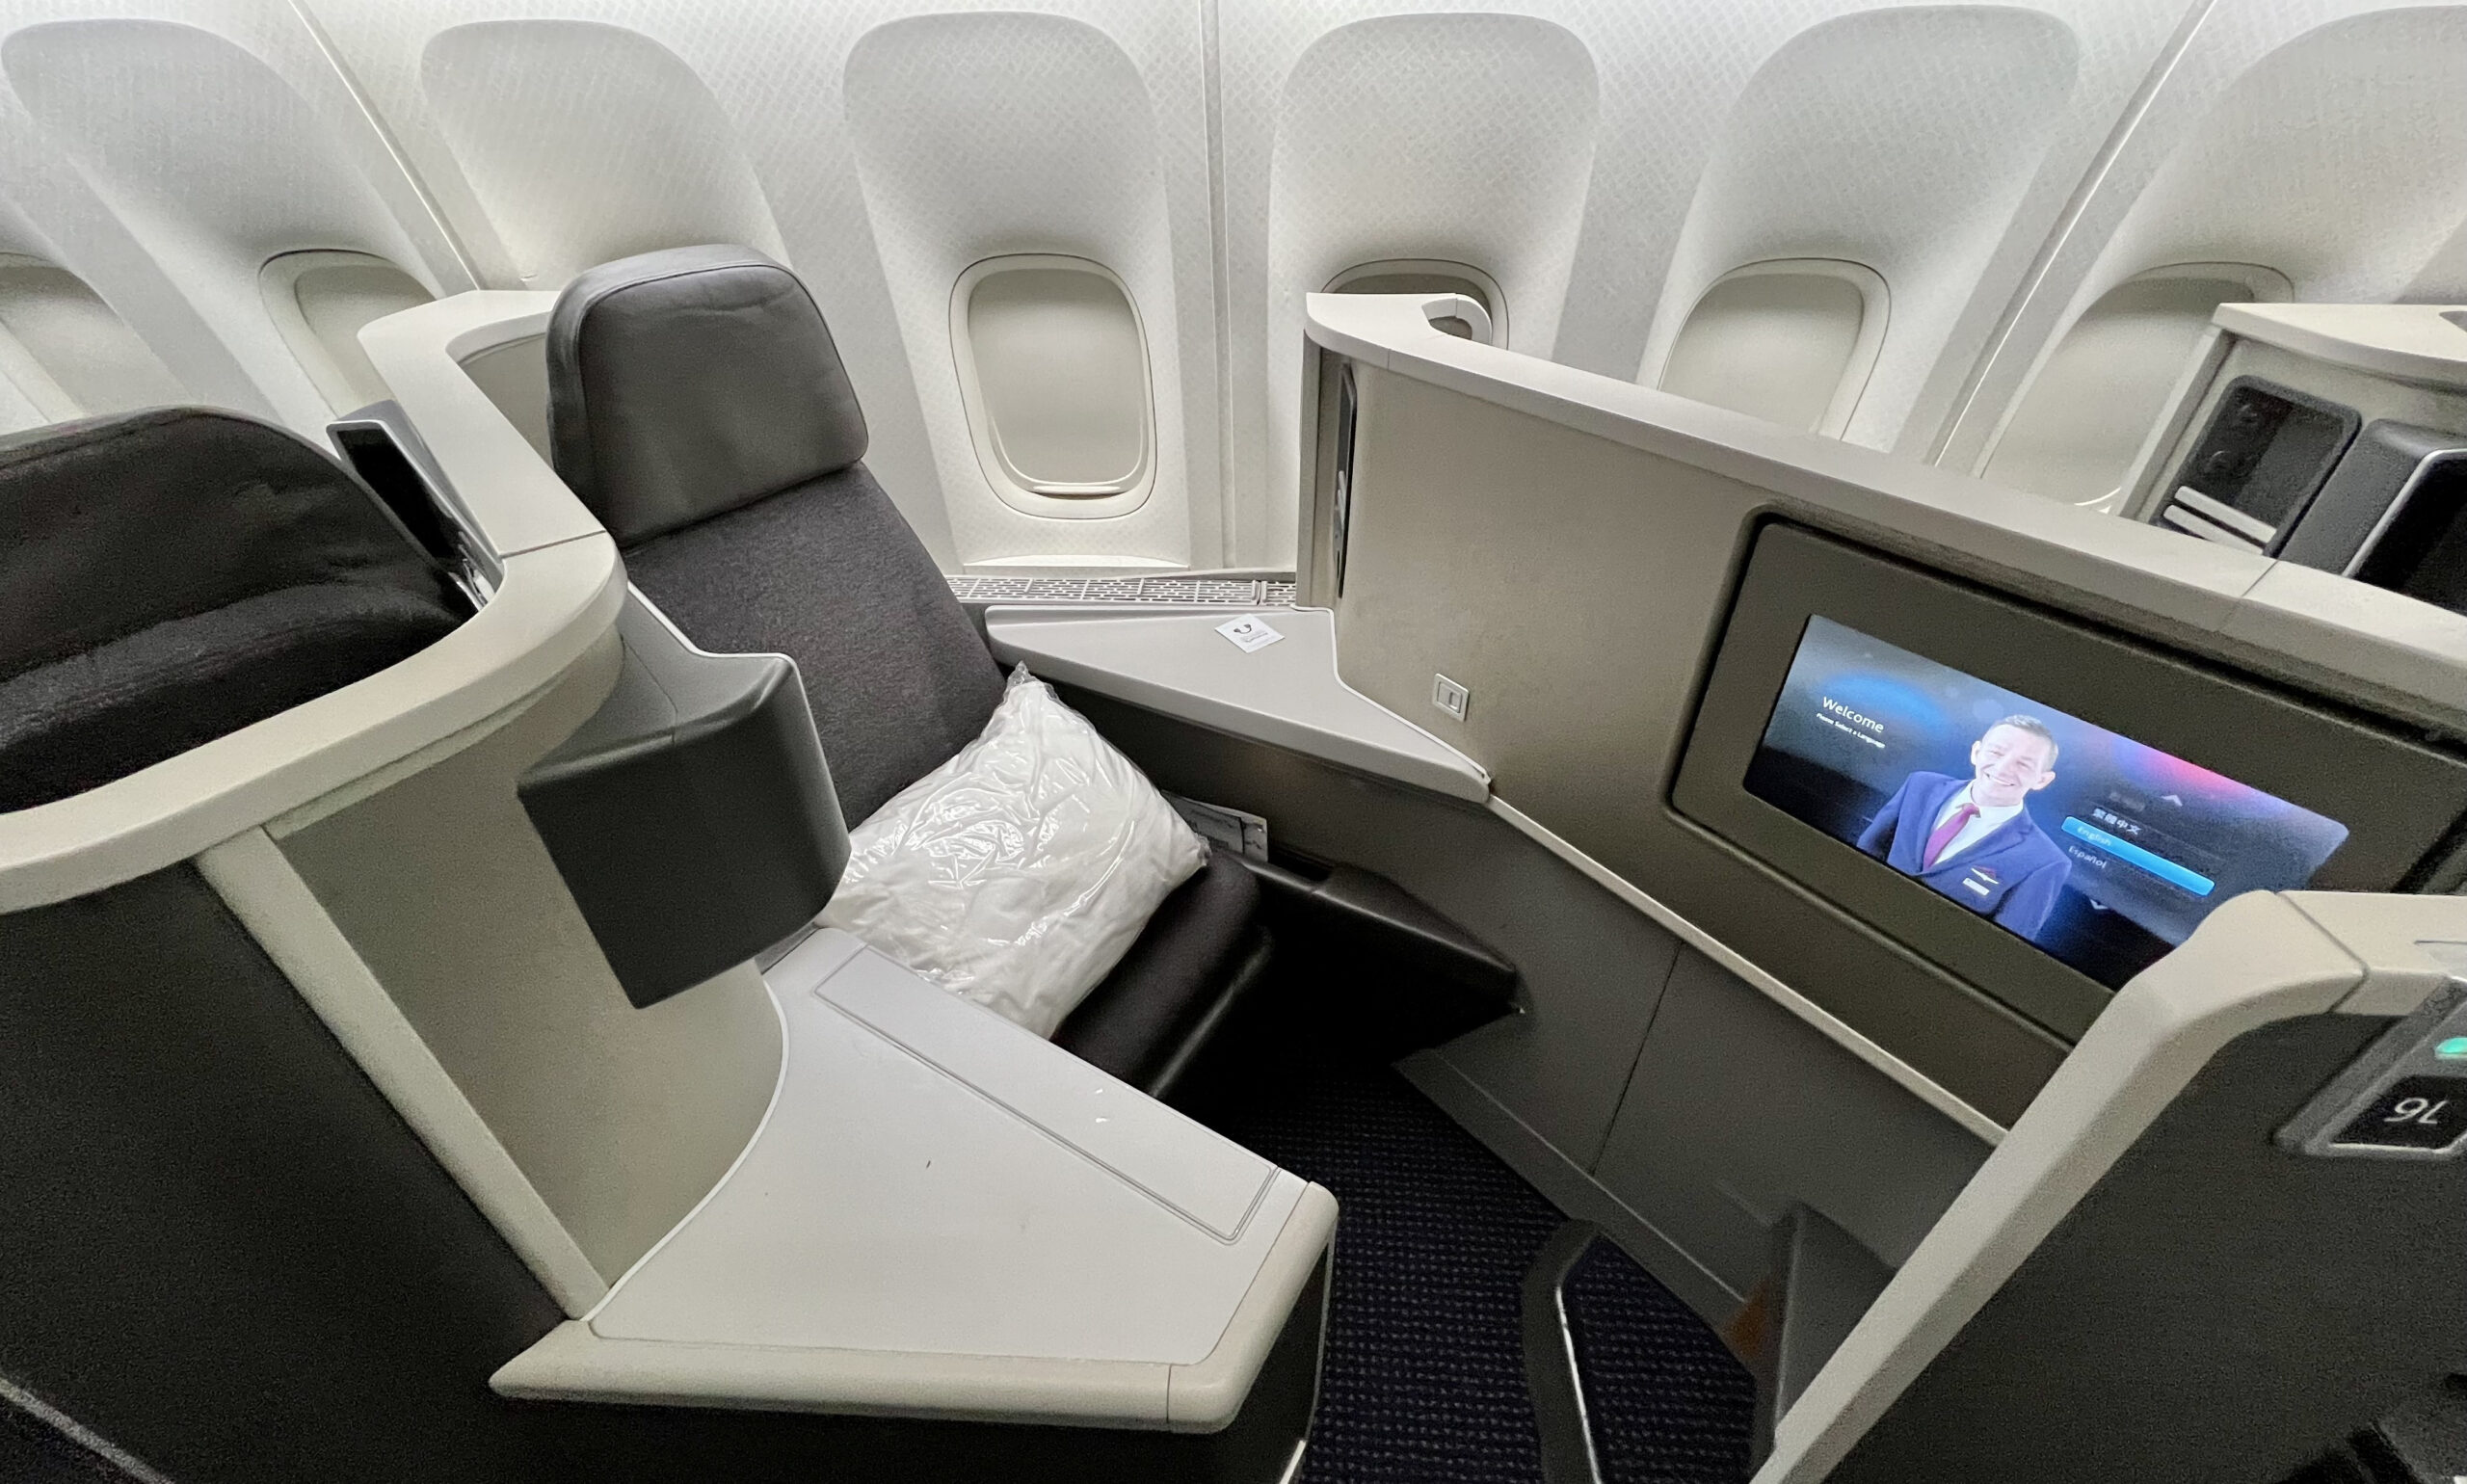 American Airlines lie-flat seat on a 787